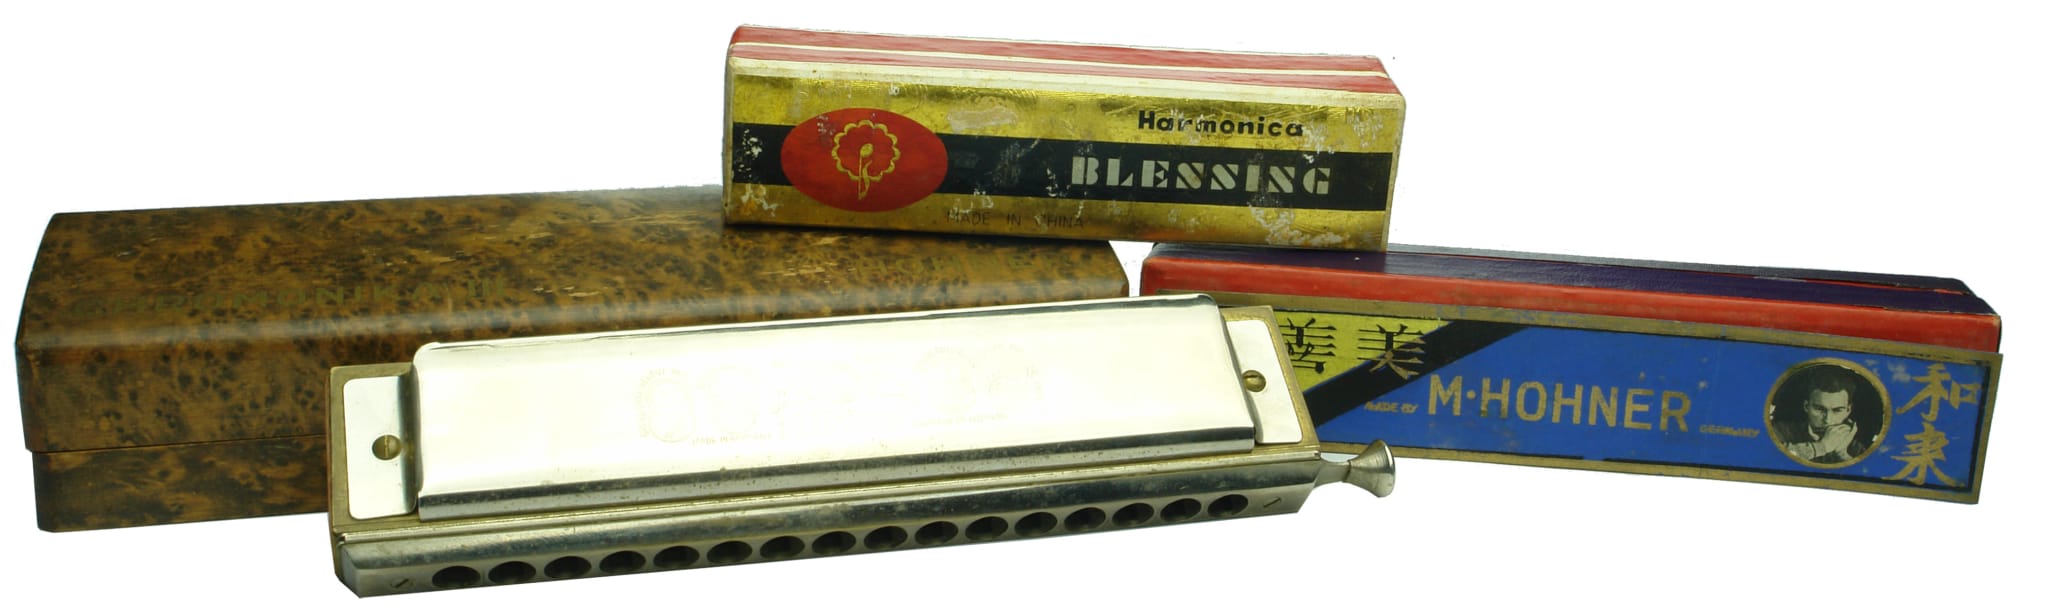 Collection Harmonicas Hohner